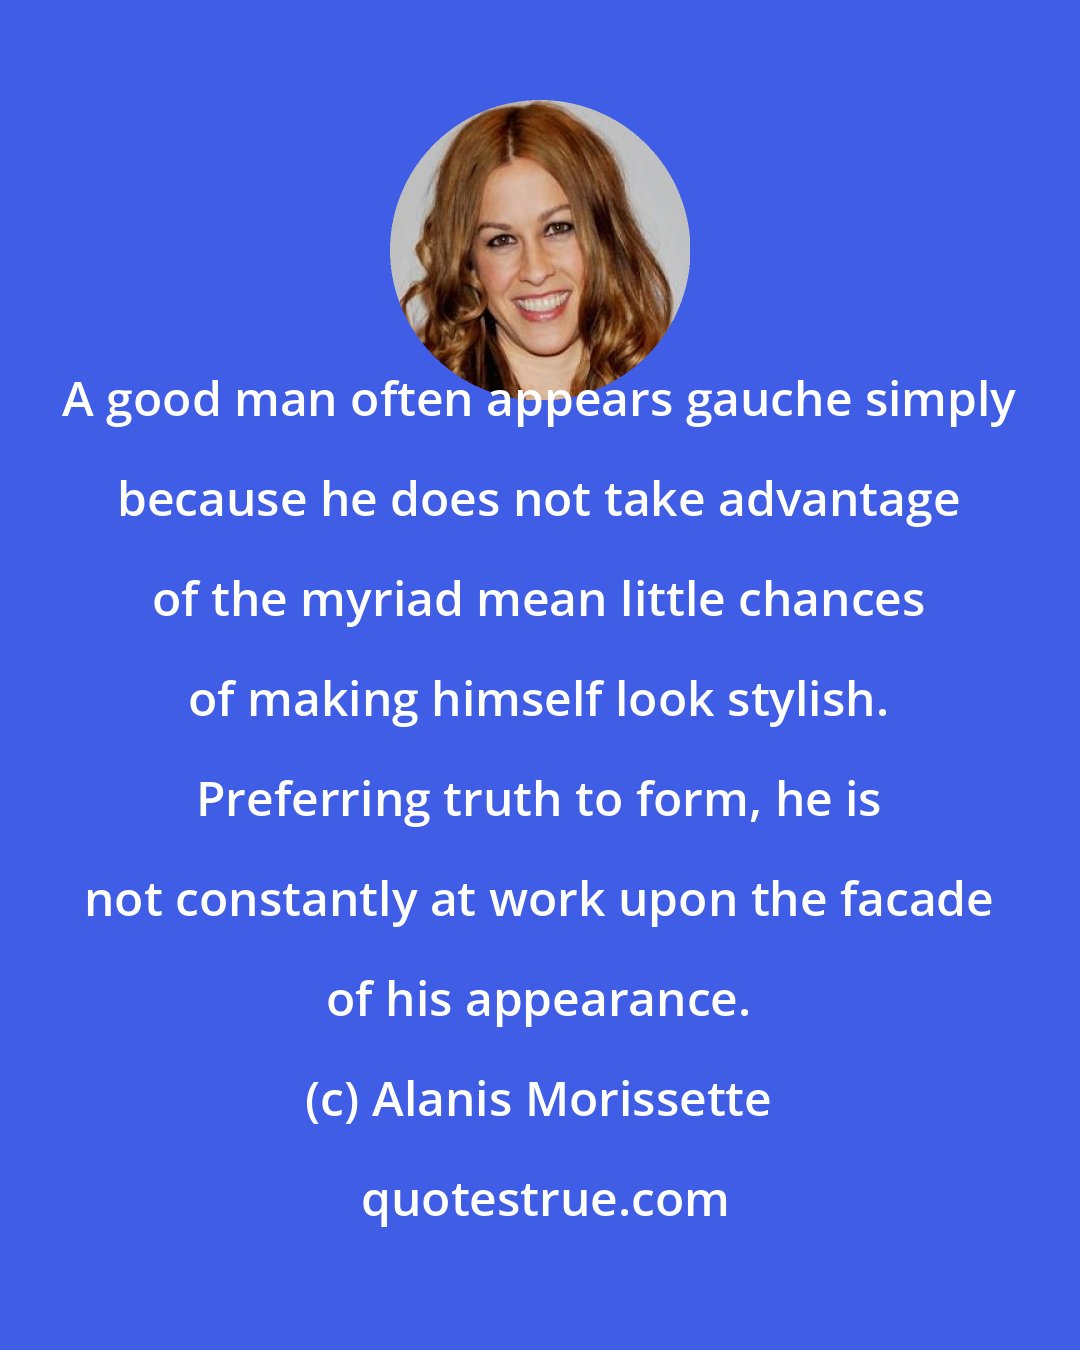 Alanis Morissette: A good man often appears gauche simply because he does not take advantage of the myriad mean little chances of making himself look stylish. Preferring truth to form, he is not constantly at work upon the facade of his appearance.